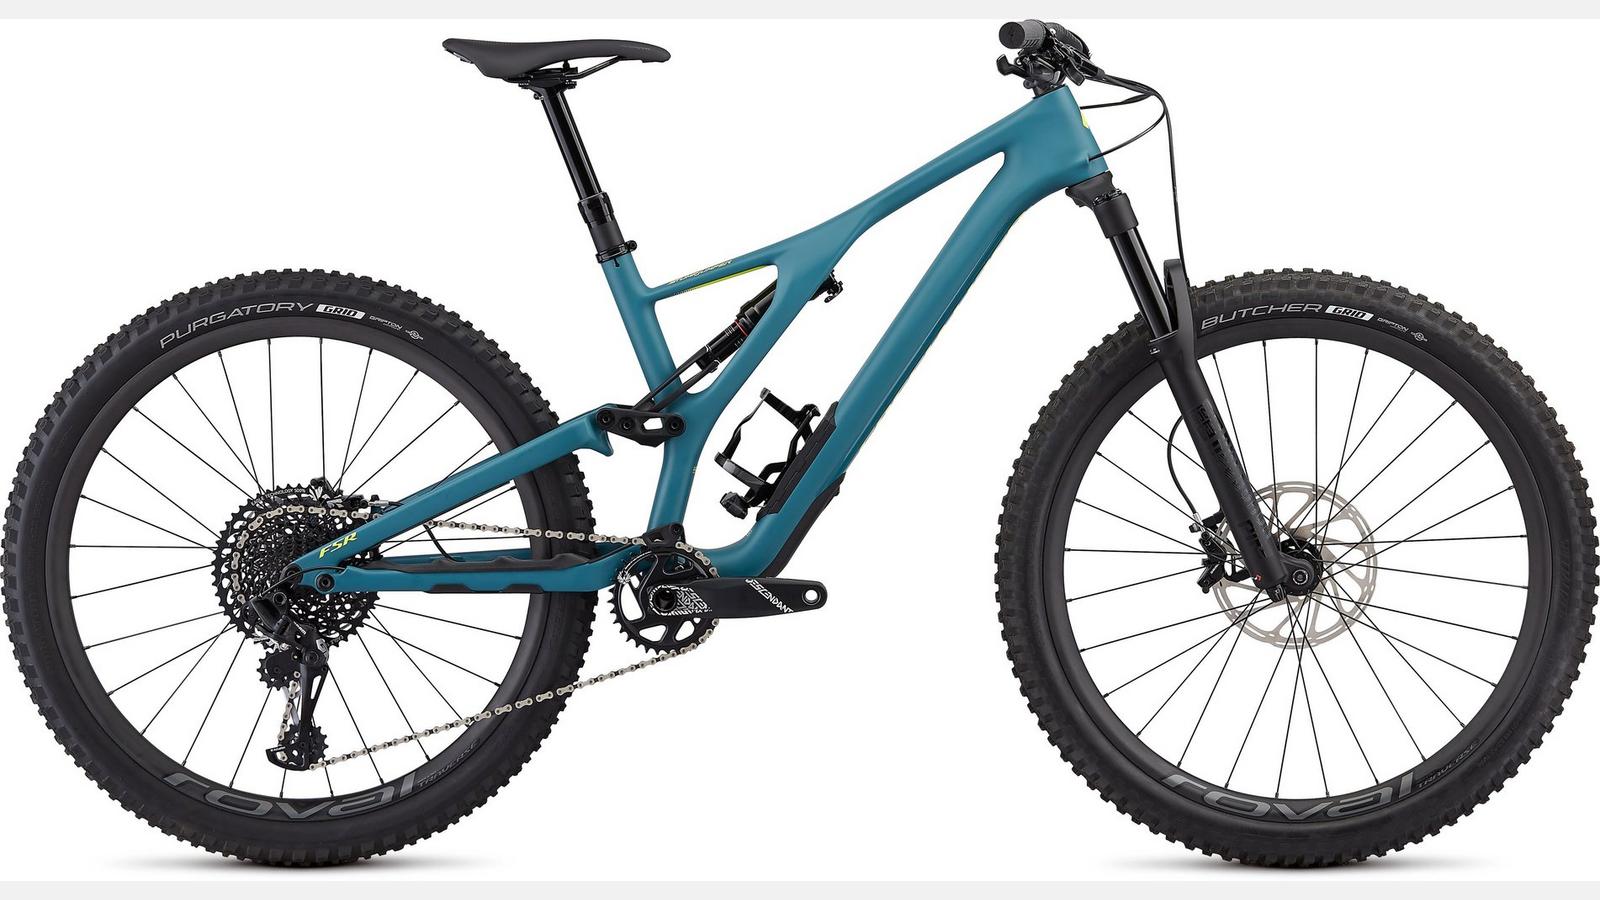 Paint for 2019 Specialized Men's Stumpjumper ST Expert 27.5 - Satin Dusty Turquoise